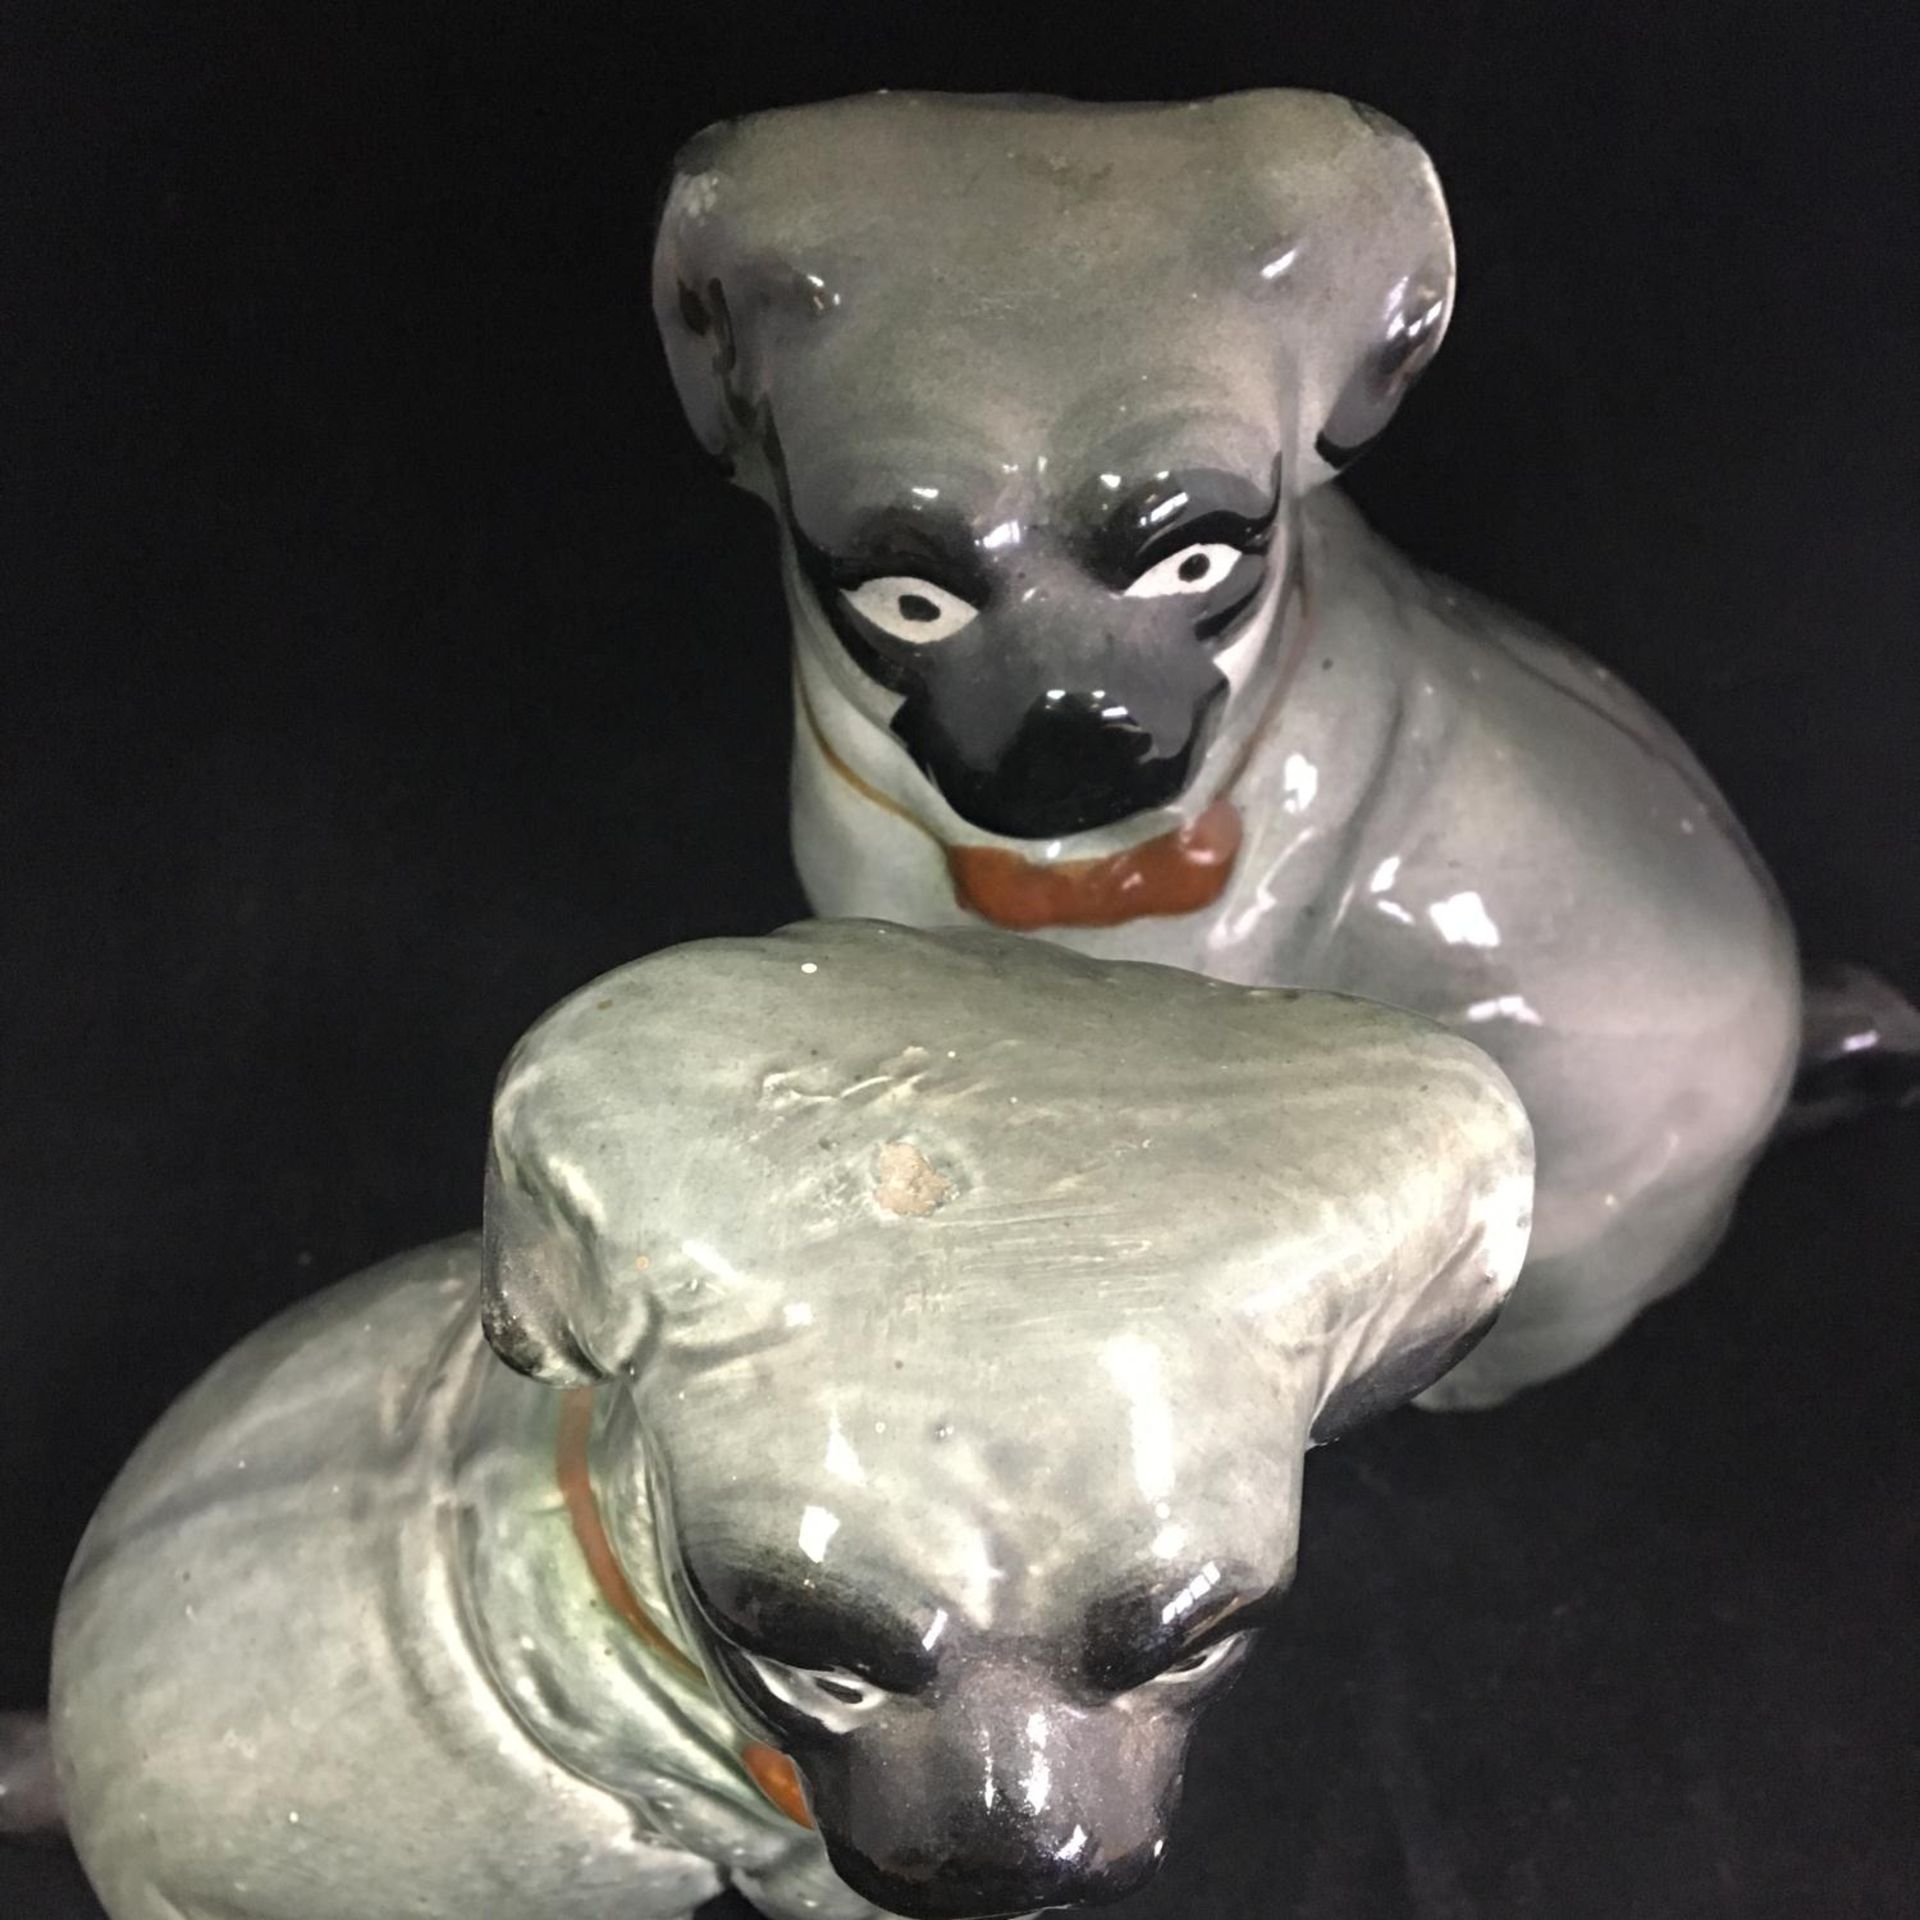 Antique Victorian era ceramic seated pugs. Matched (not an exact pair). Standing around 20cm high. - Image 5 of 6